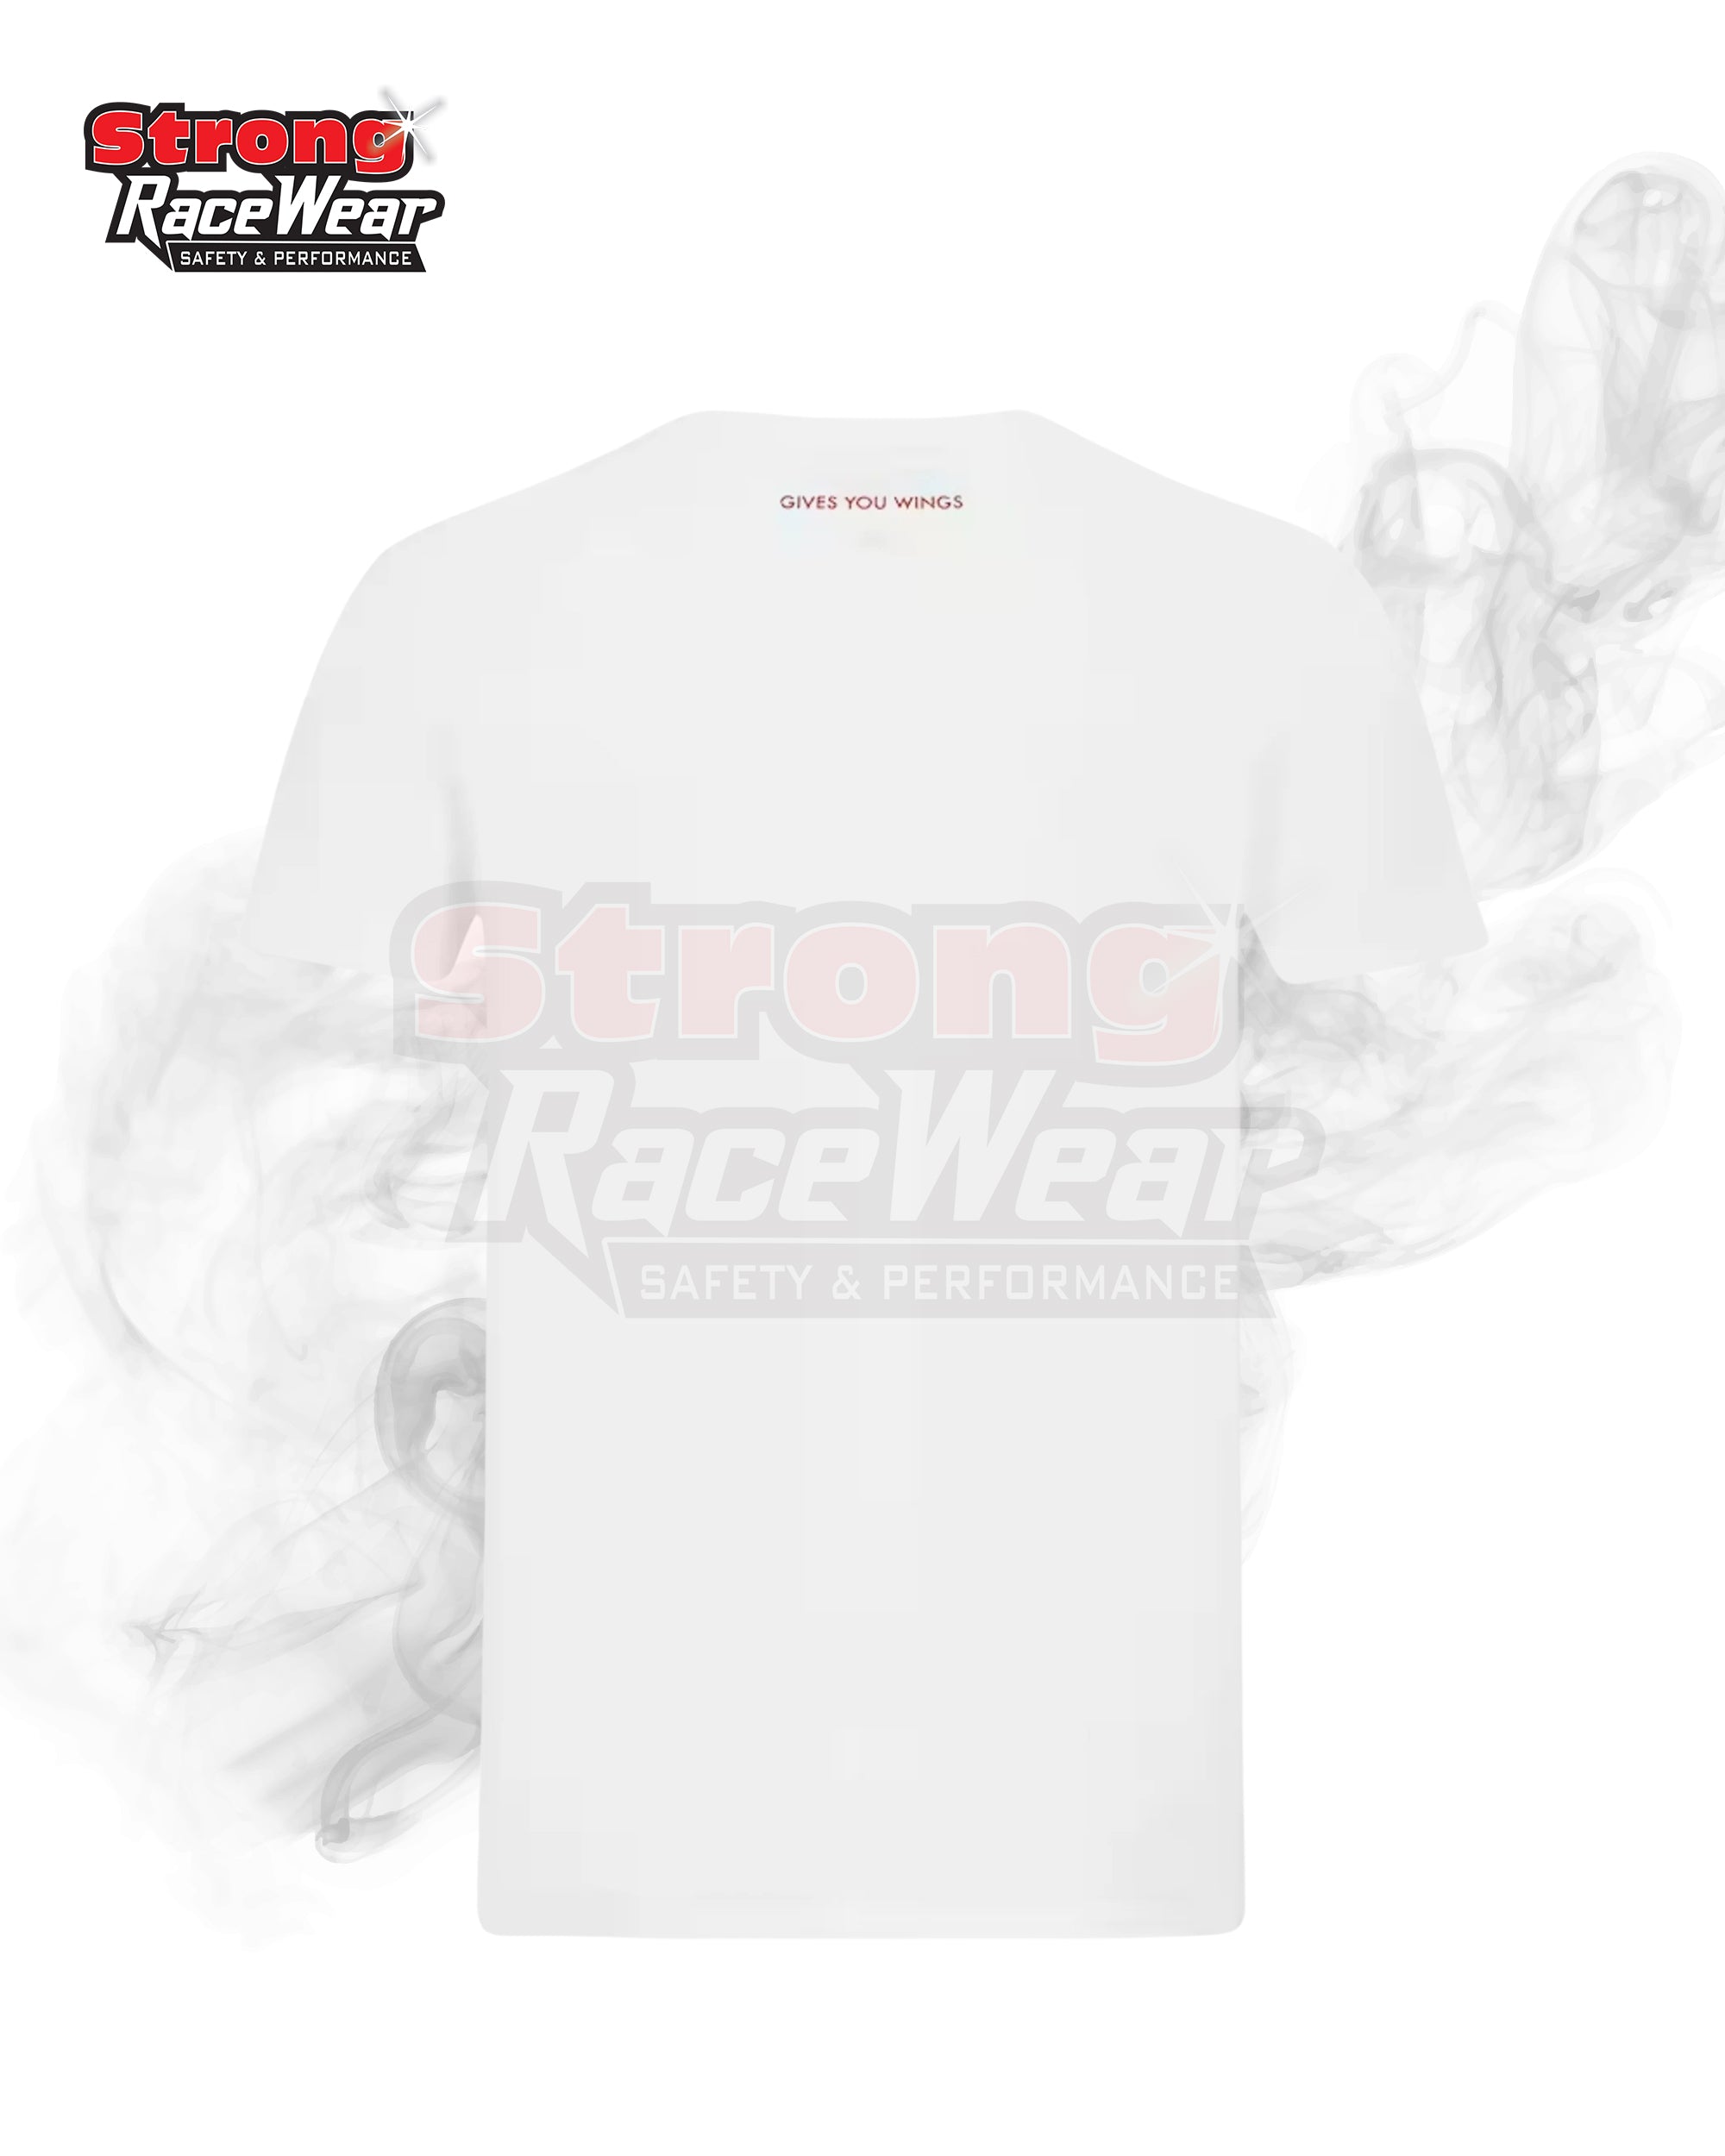 Oracle Red Bull Racing T-Shirt